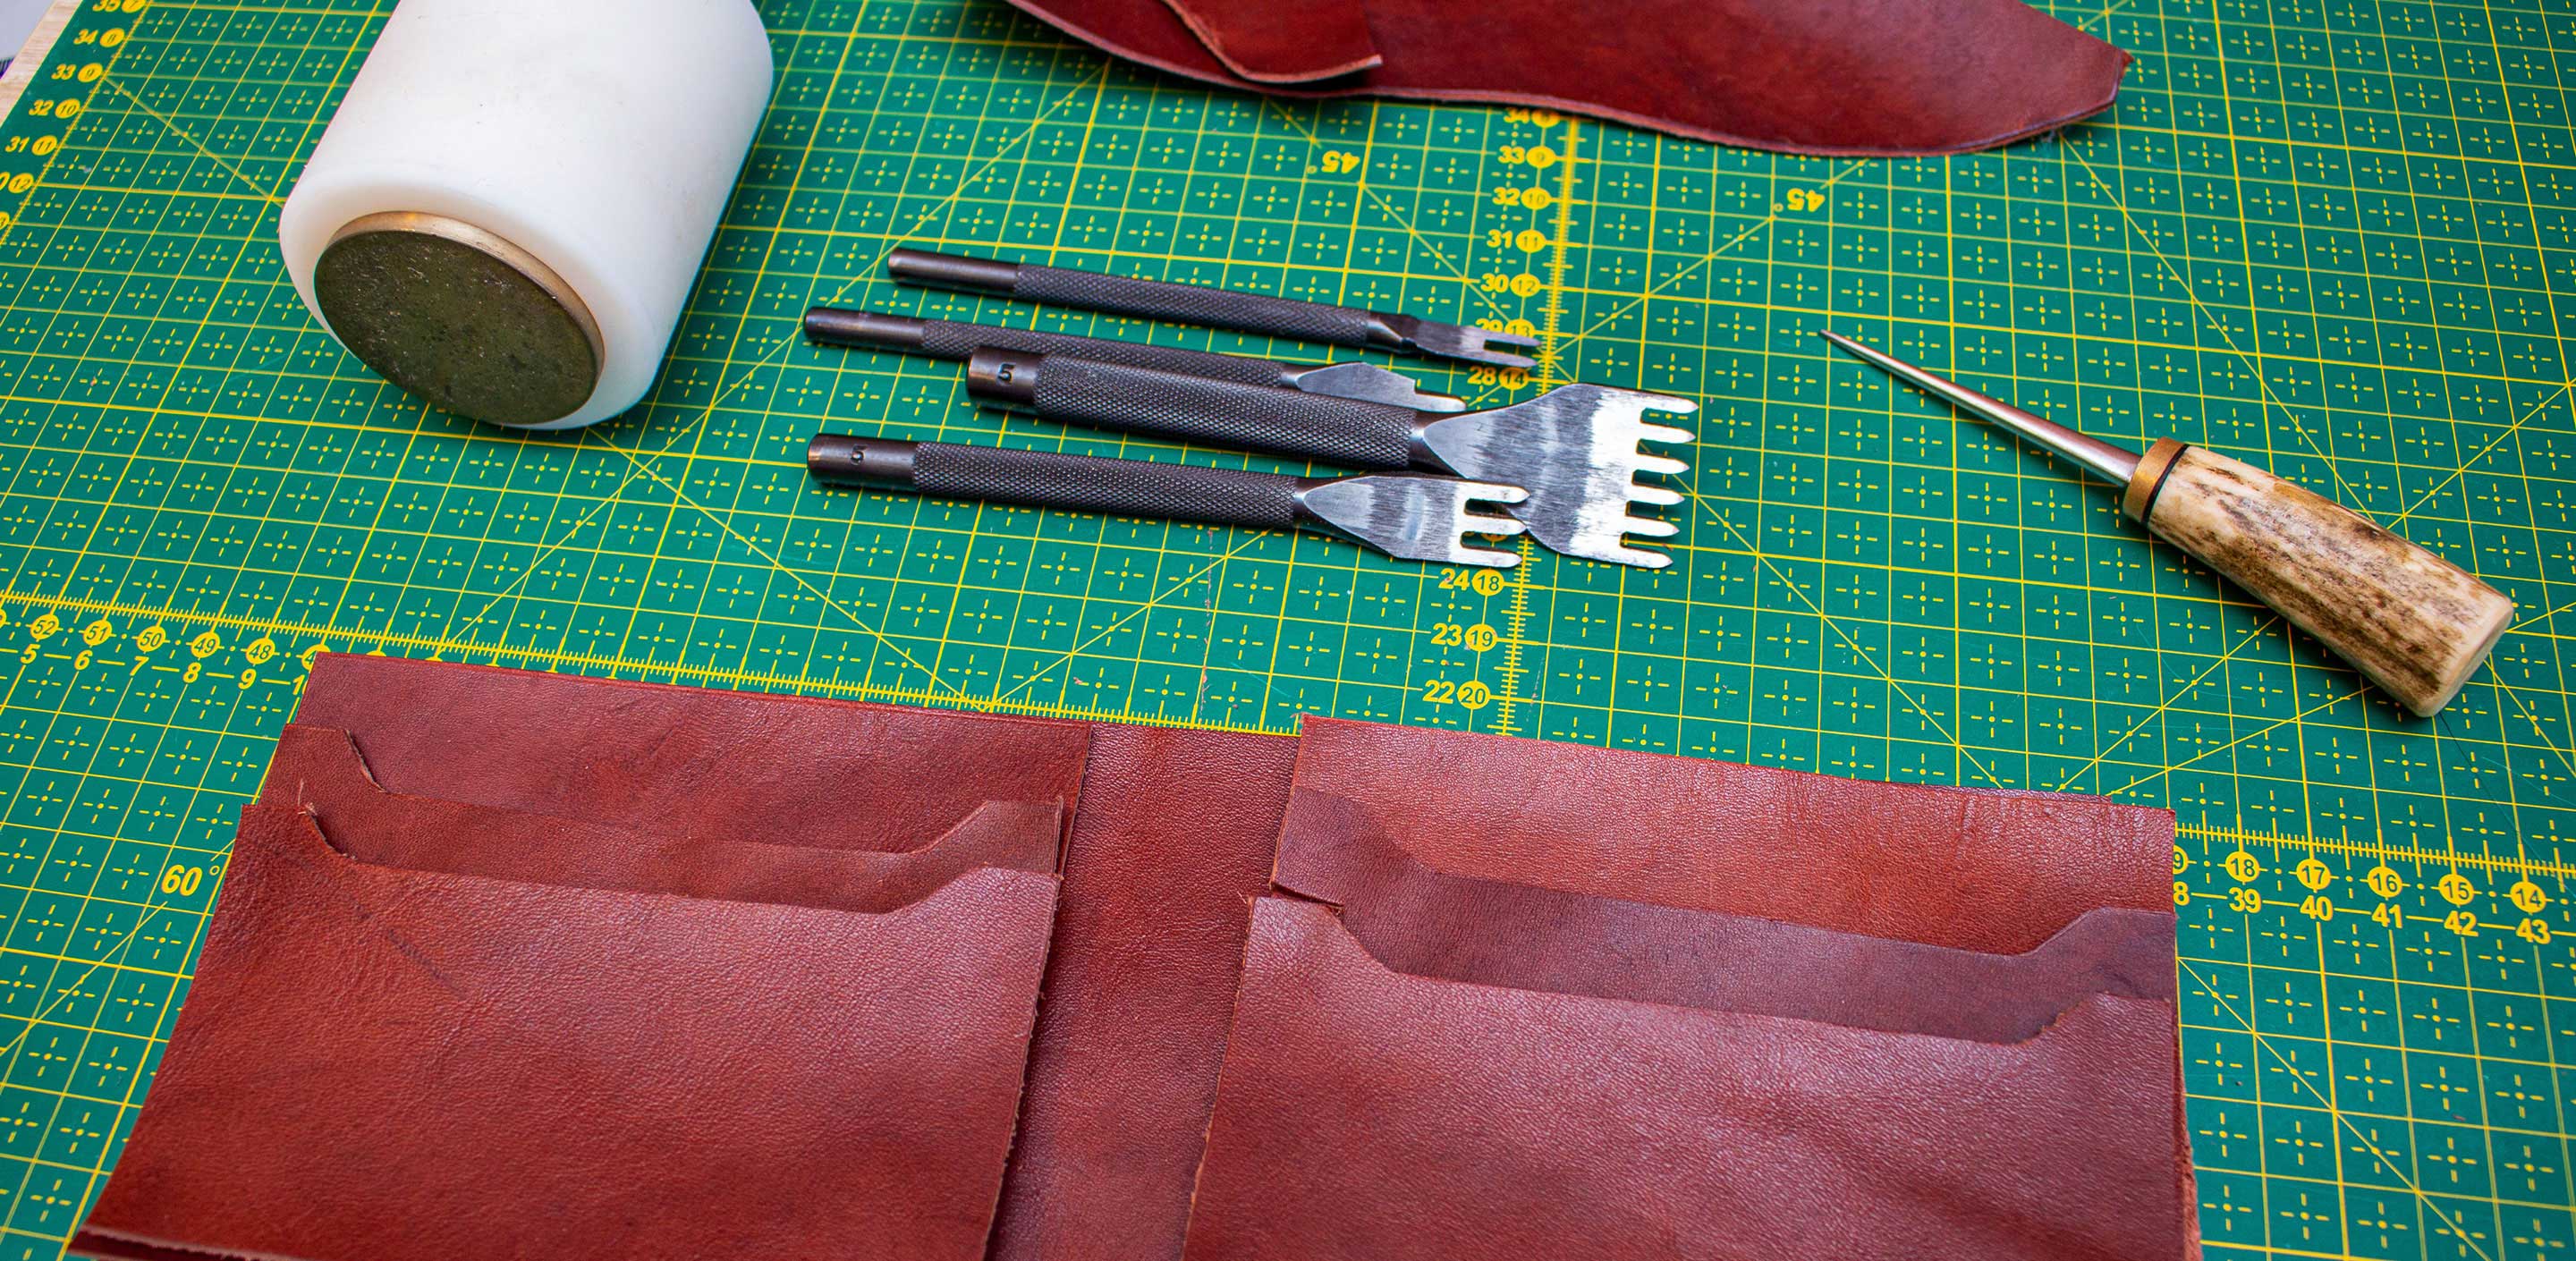 Tools For Tooling Leather